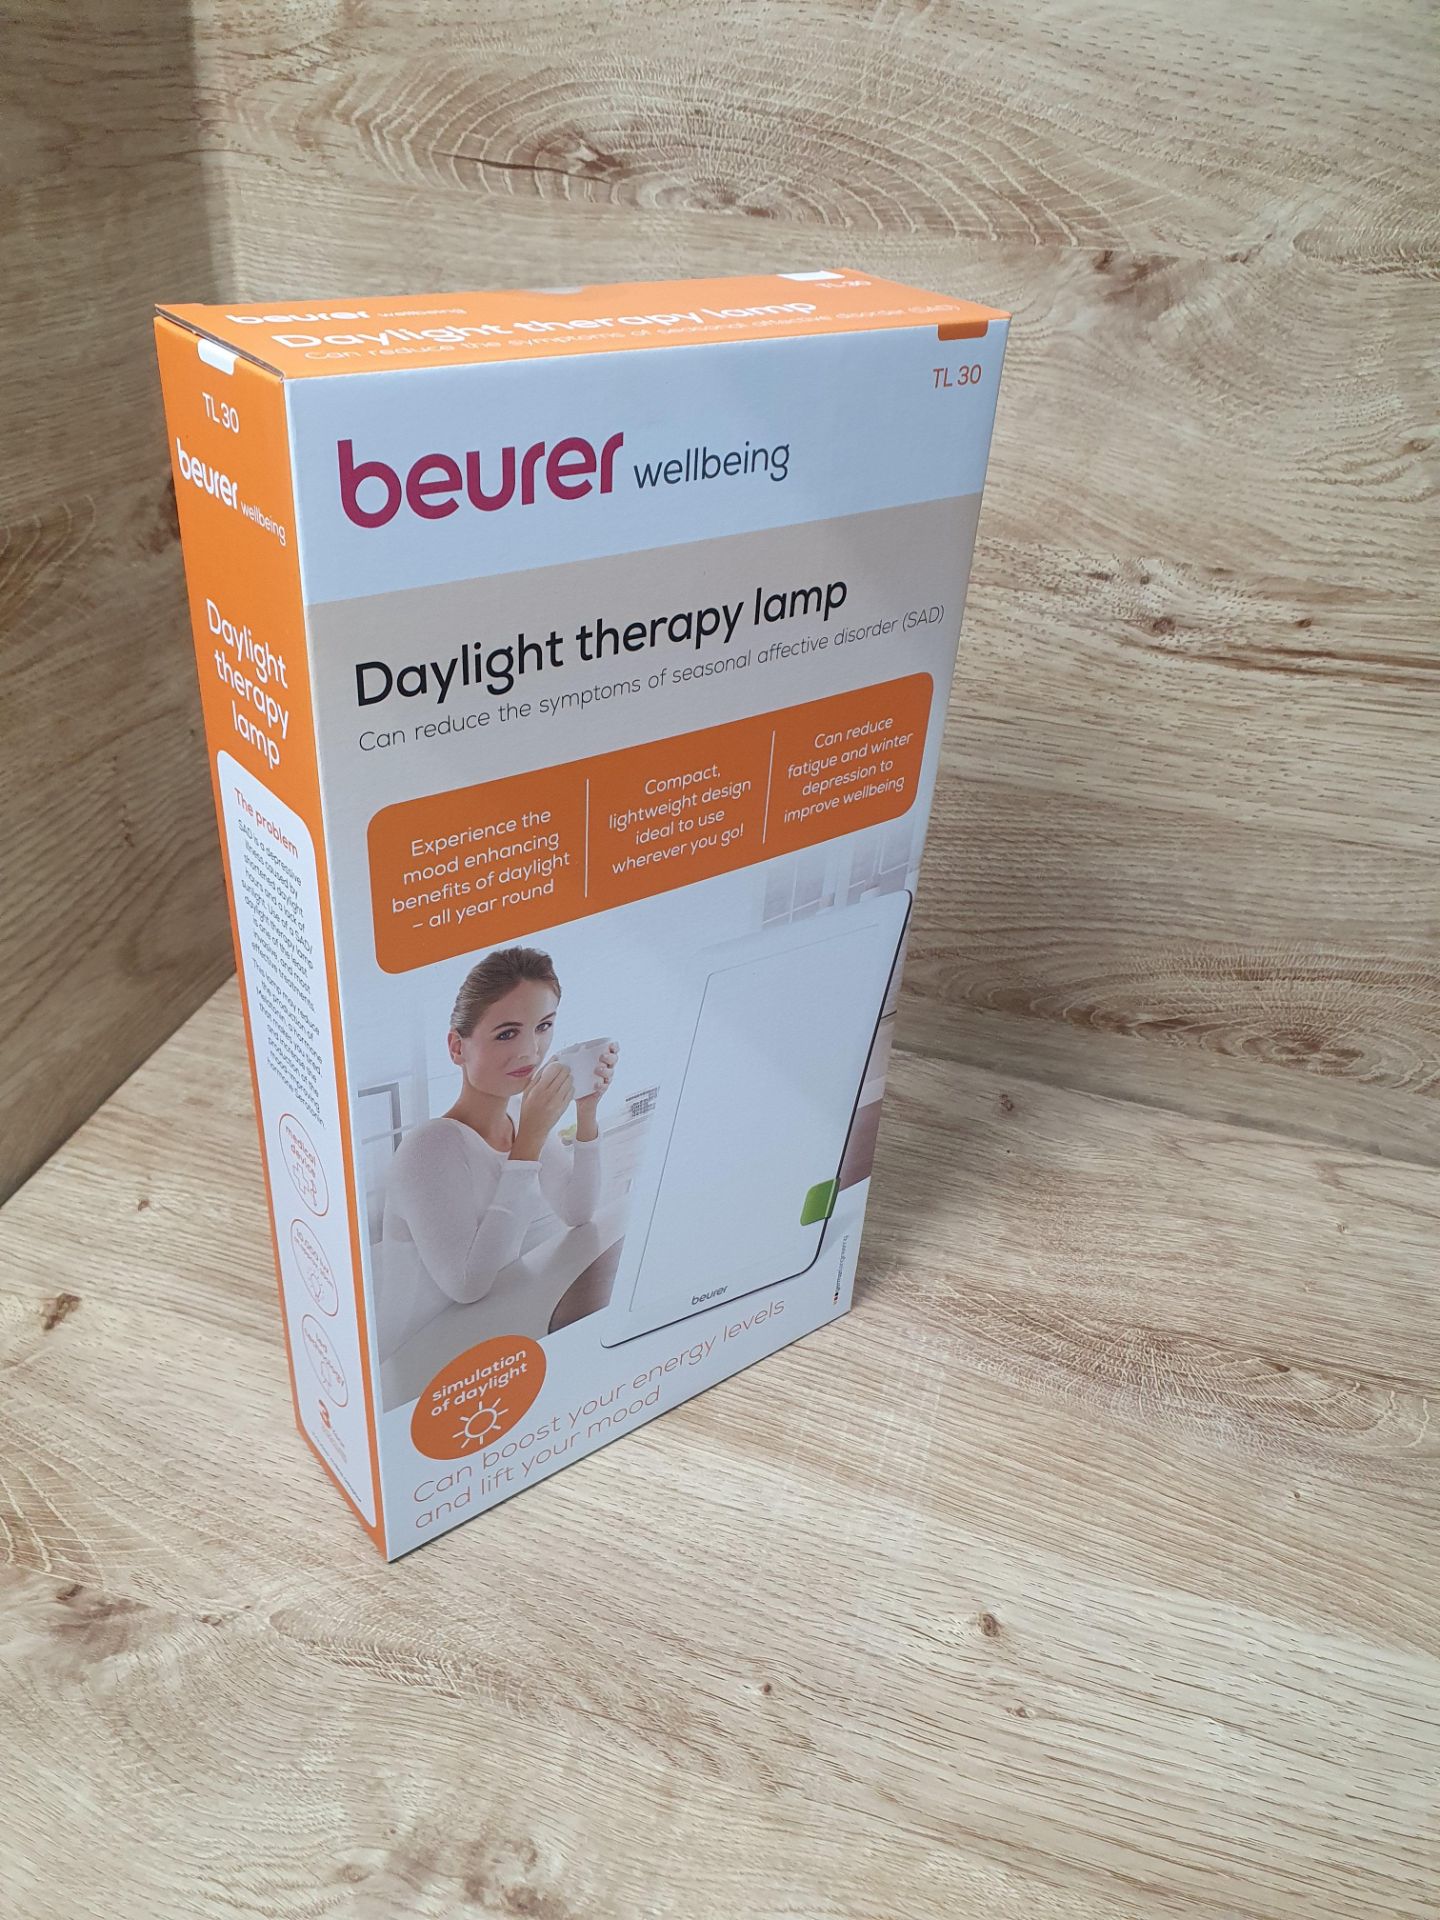 * Beurer dayligght therapy lamp